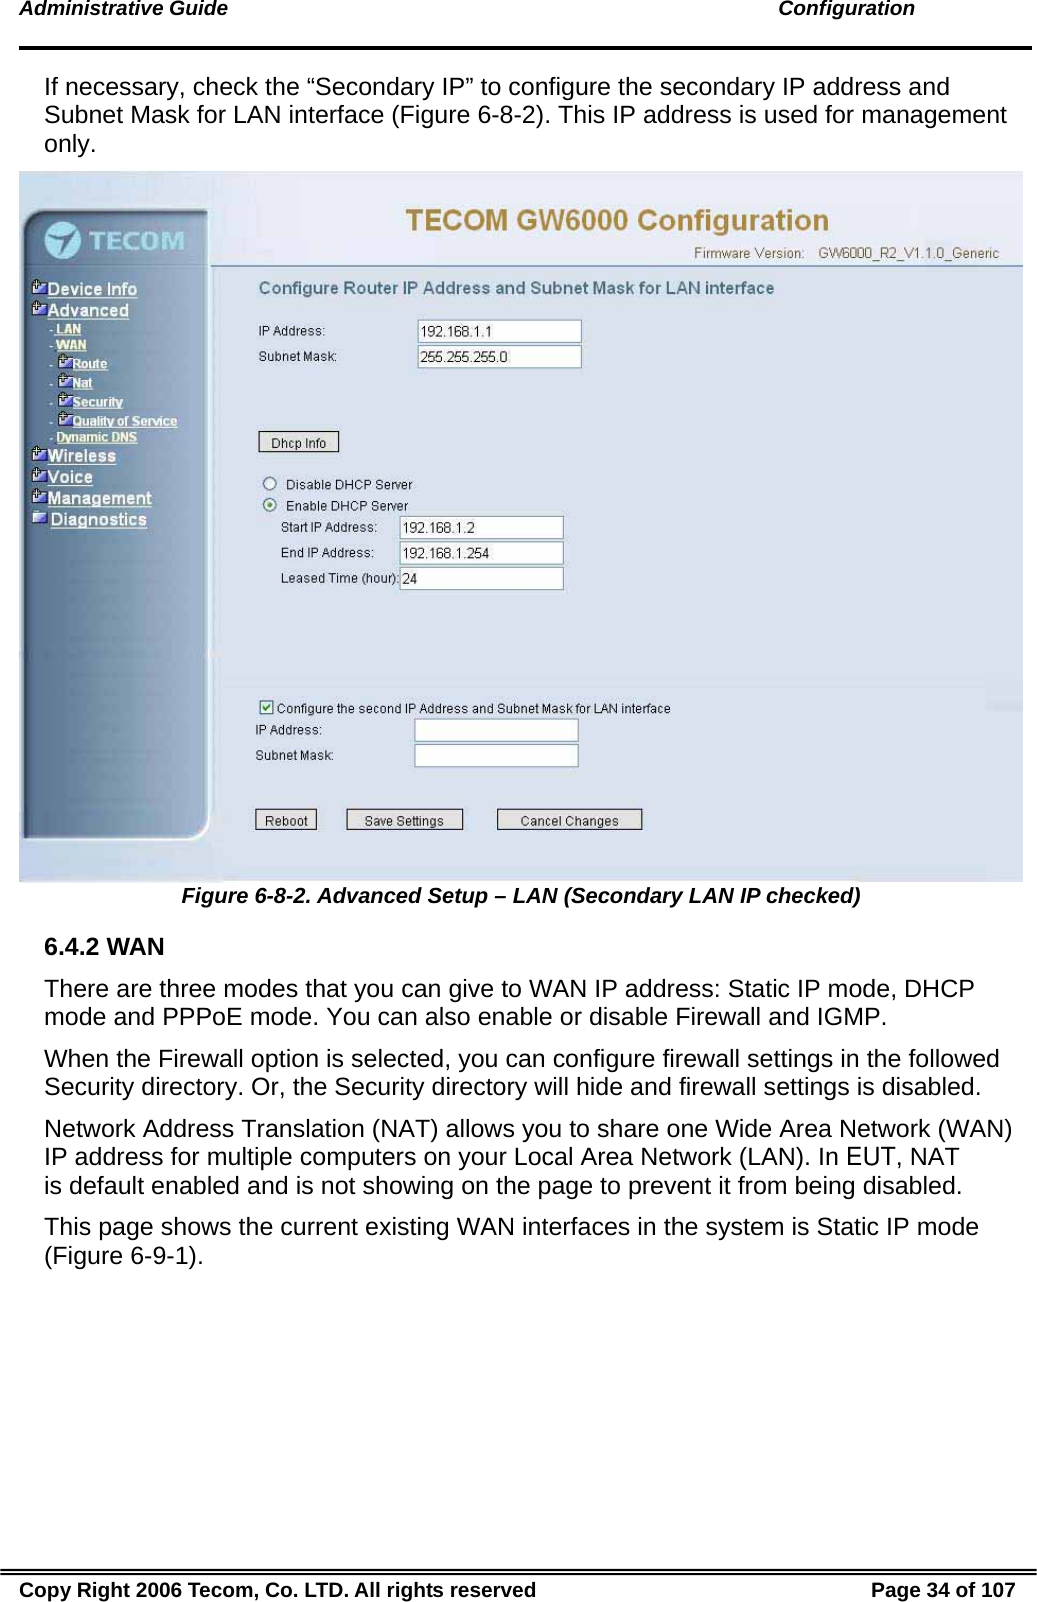 Administrative Guide                                                                                               Configuration If necessary, check the “Secondary IP” to configure the secondary IP address and Subnet Mask for LAN interface (Figure 6-8-2). This IP address is used for management only.  Figure 6-8-2. Advanced Setup – LAN (Secondary LAN IP checked) 6.4.2 WAN There are three modes that you can give to WAN IP address: Static IP mode, DHCP mode and PPPoE mode. You can also enable or disable Firewall and IGMP. When the Firewall option is selected, you can configure firewall settings in the followed Security directory. Or, the Security directory will hide and firewall settings is disabled. Network Address Translation (NAT) allows you to share one Wide Area Network (WAN) IP address for multiple computers on your Local Area Network (LAN). In EUT, NAT is default enabled and is not showing on the page to prevent it from being disabled. This page shows the current existing WAN interfaces in the system is Static IP mode (Figure 6-9-1). Copy Right 2006 Tecom, Co. LTD. All rights reserved  Page 34 of 107 